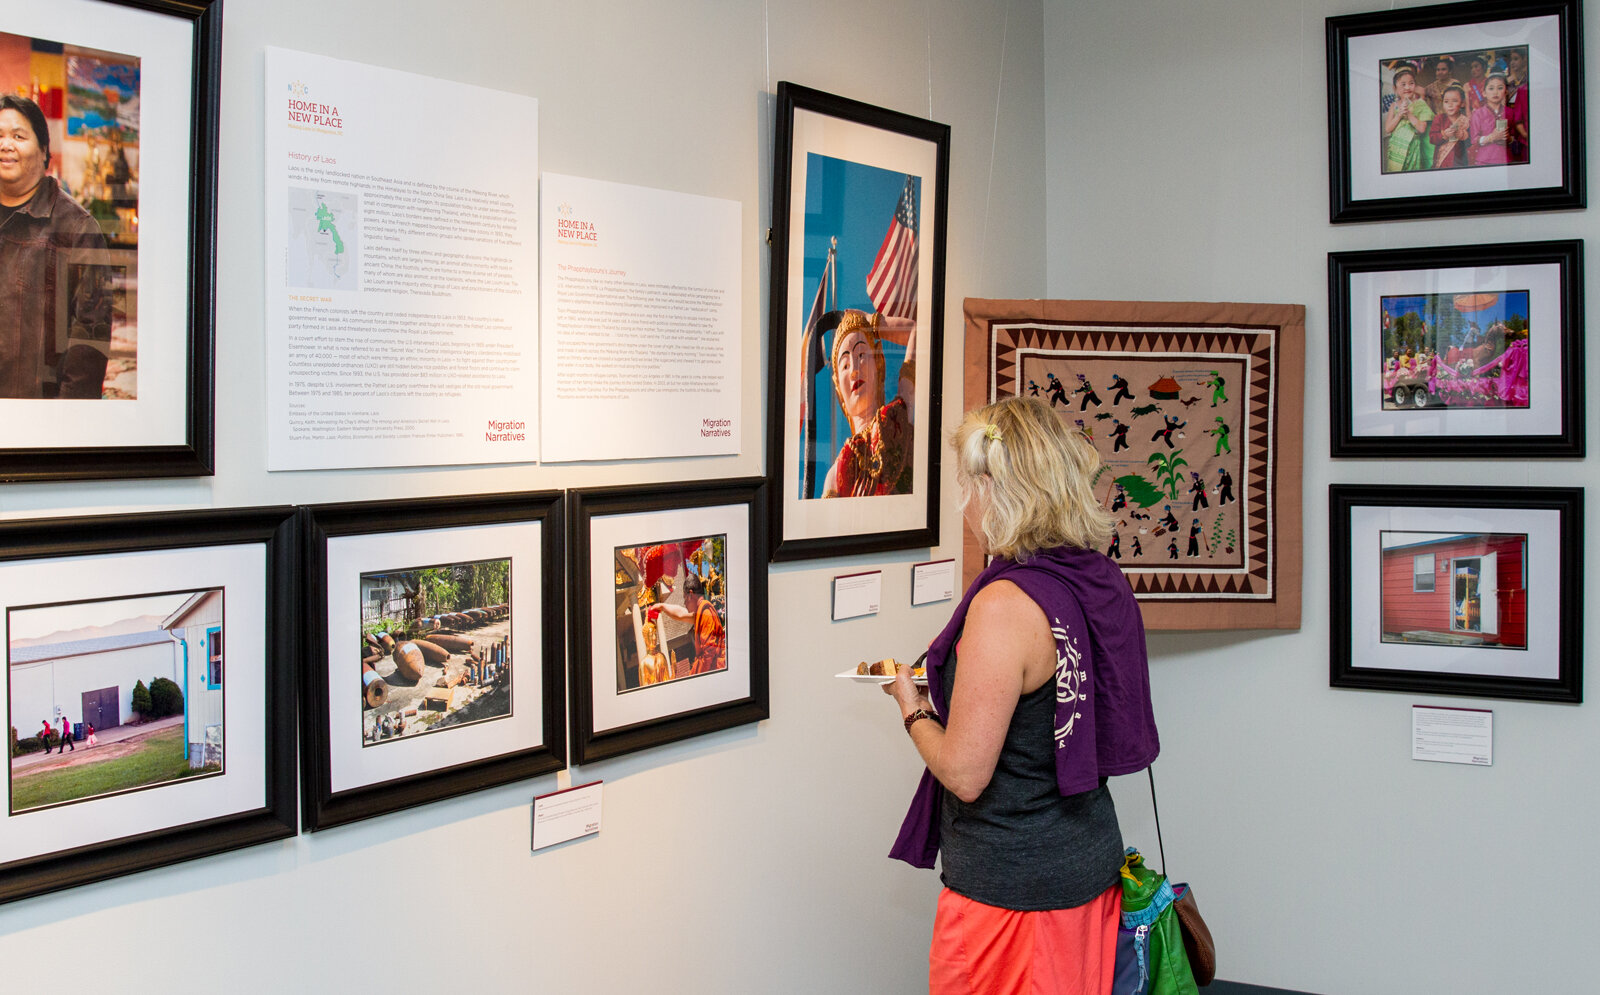 "Home in a New Place: Making Laos in Morganton, NC" on view at UNC Global